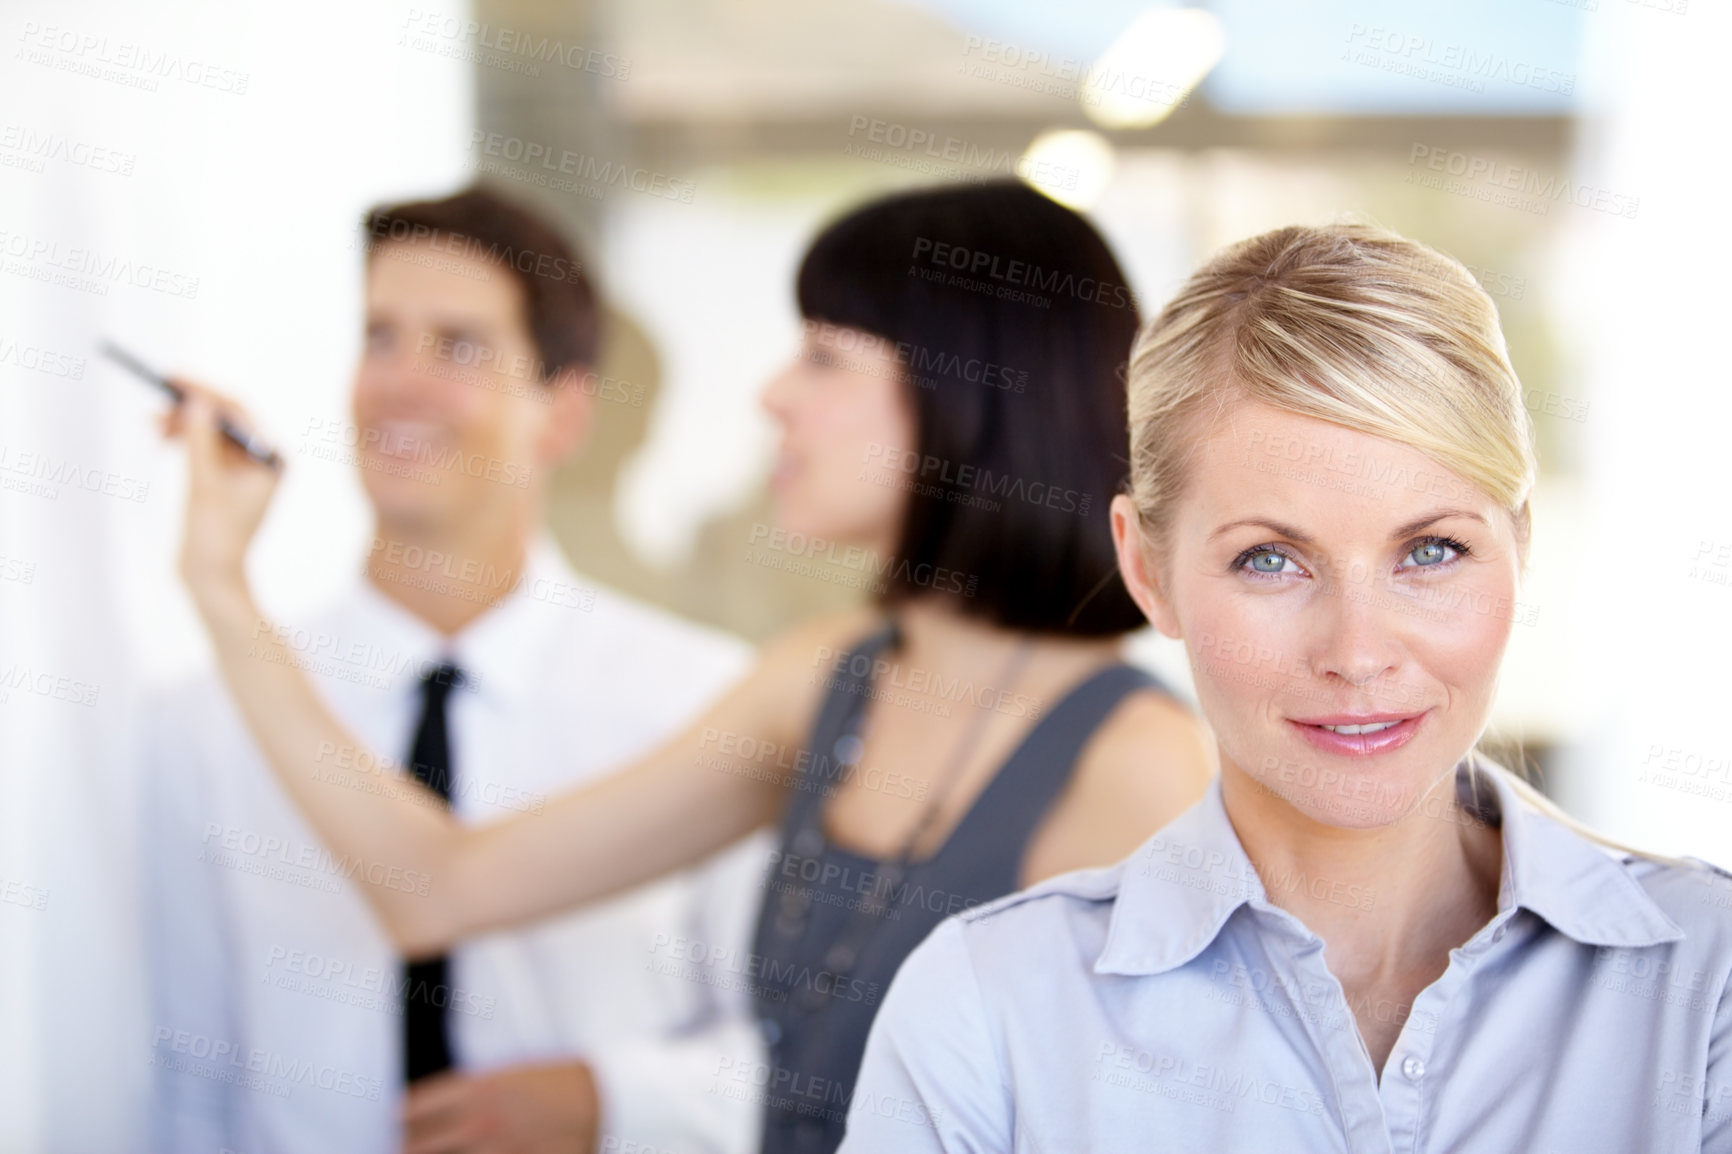 Buy stock photo Portrait of a pretty businesswoman smiling - blurred colleagues in the background